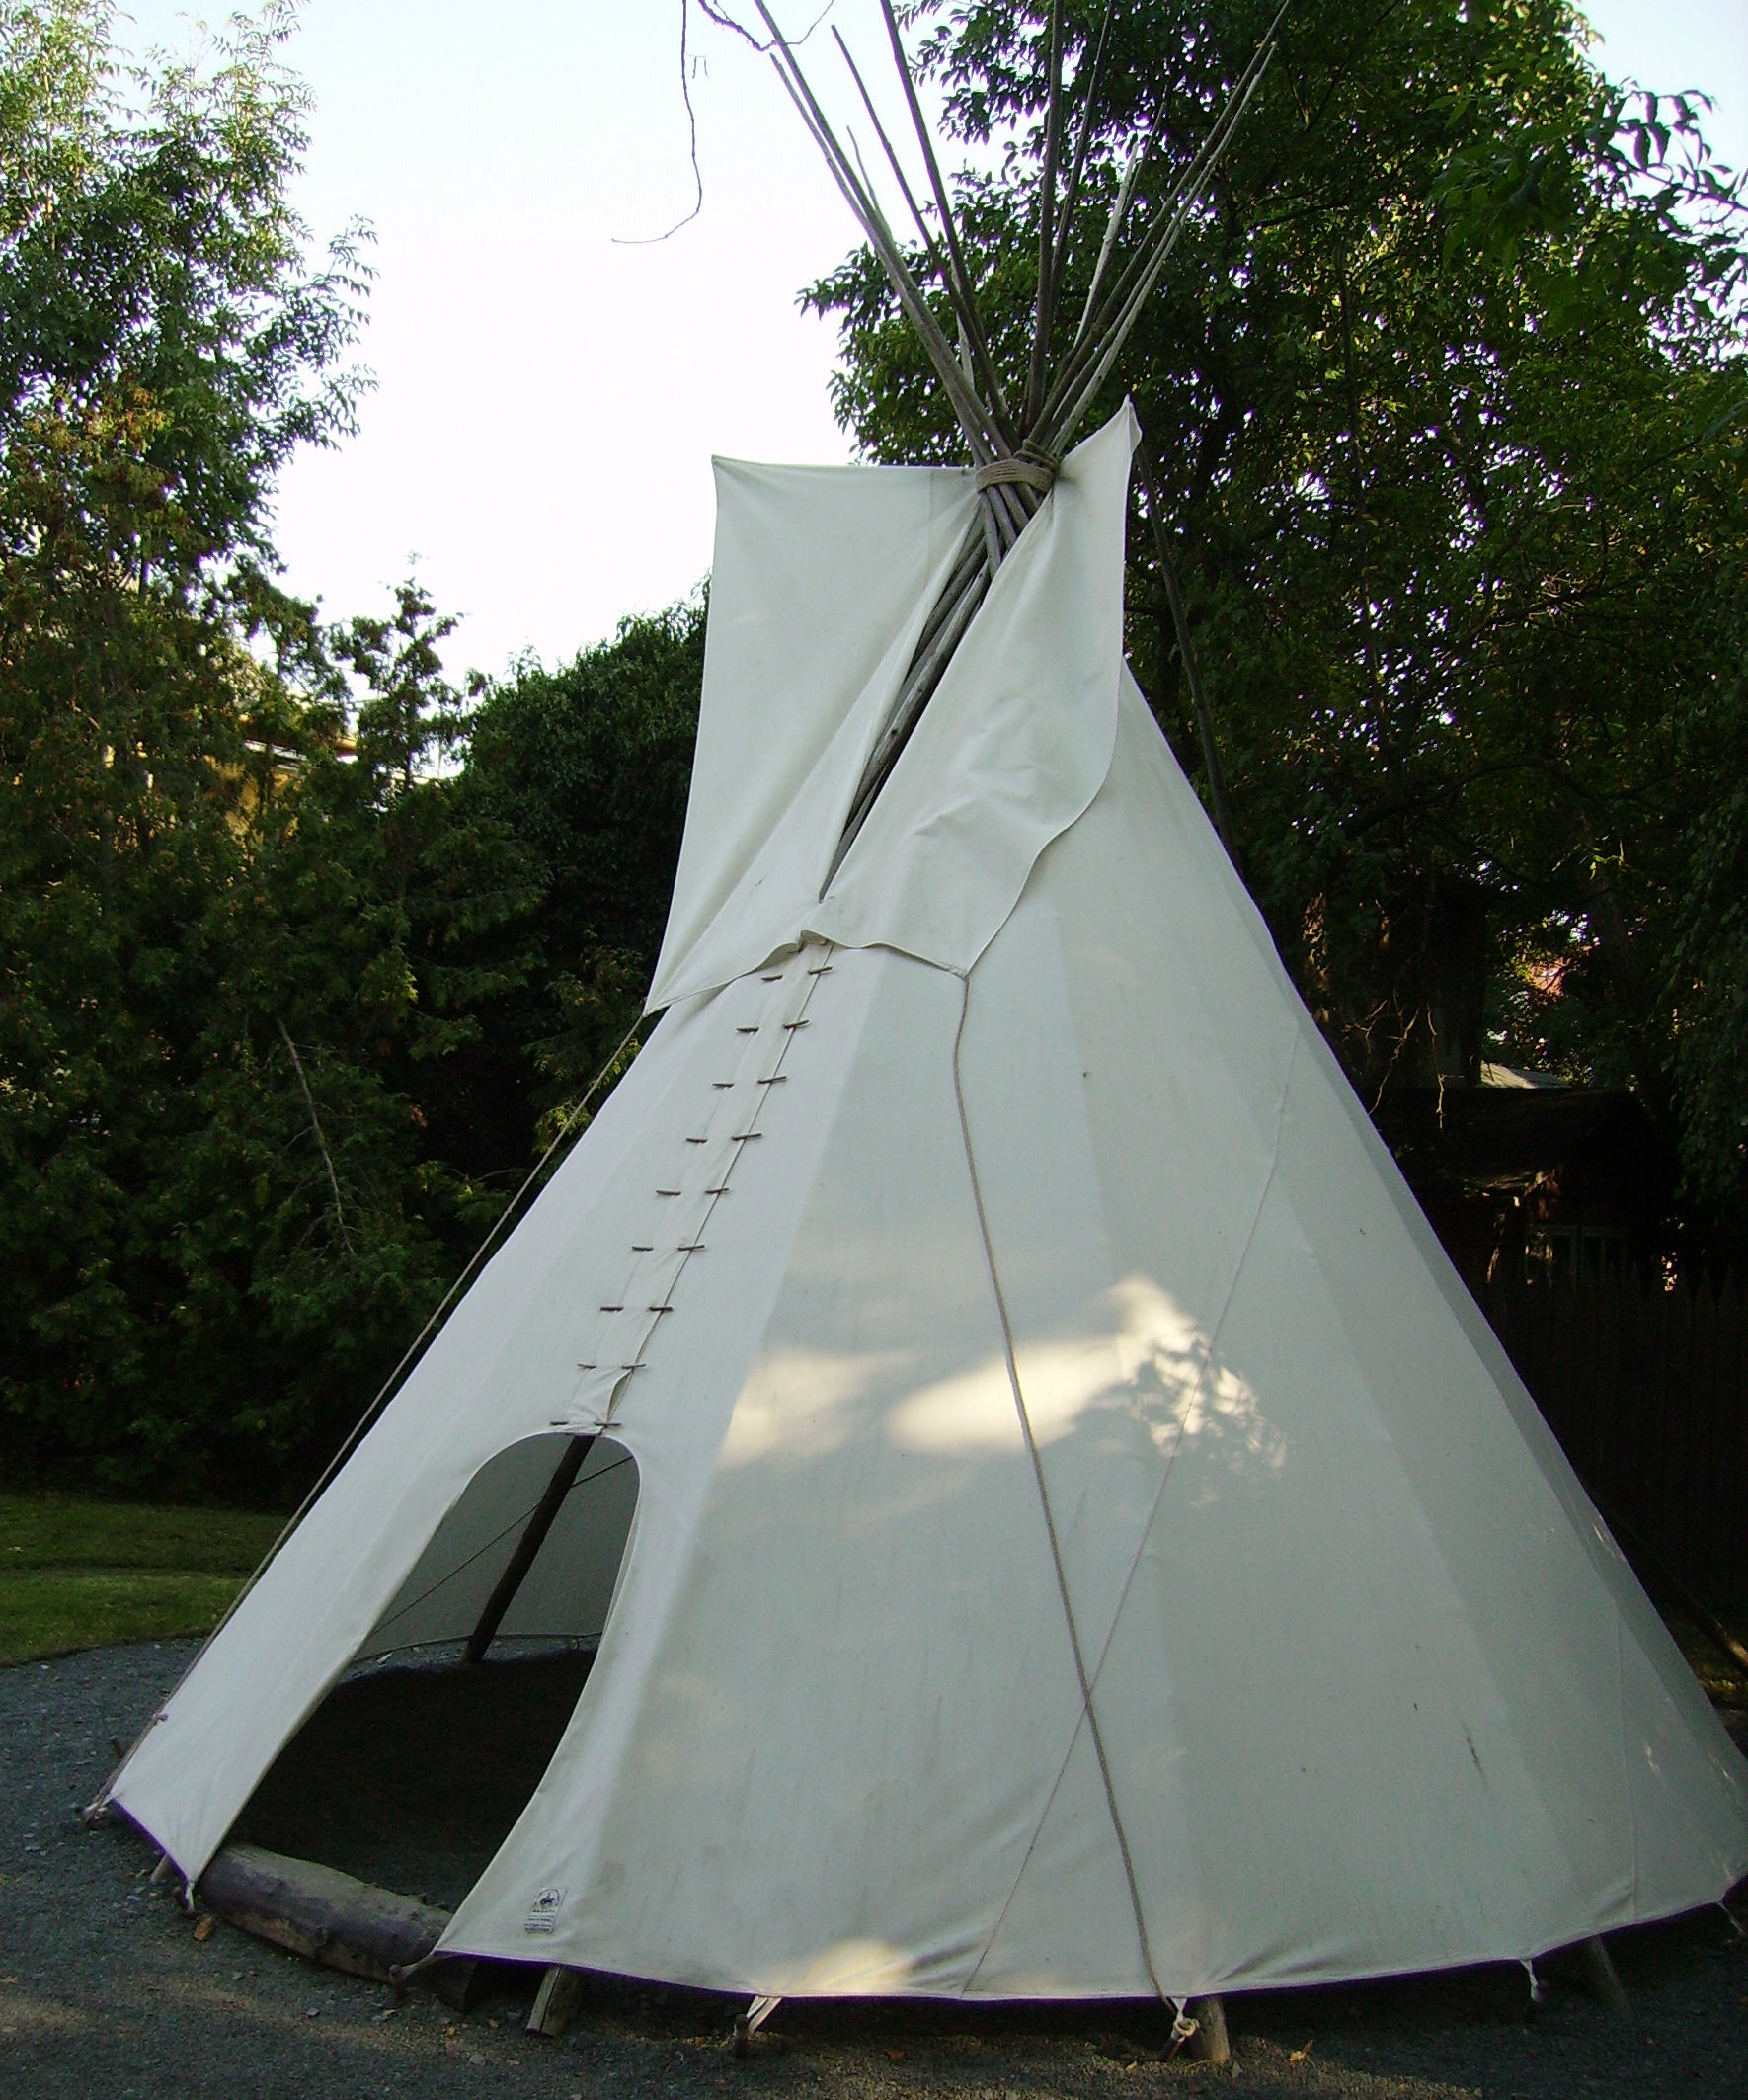 http://fr.academic.ru/pictures/frwiki/75/Karl_May_Museum_Tipi.jpg